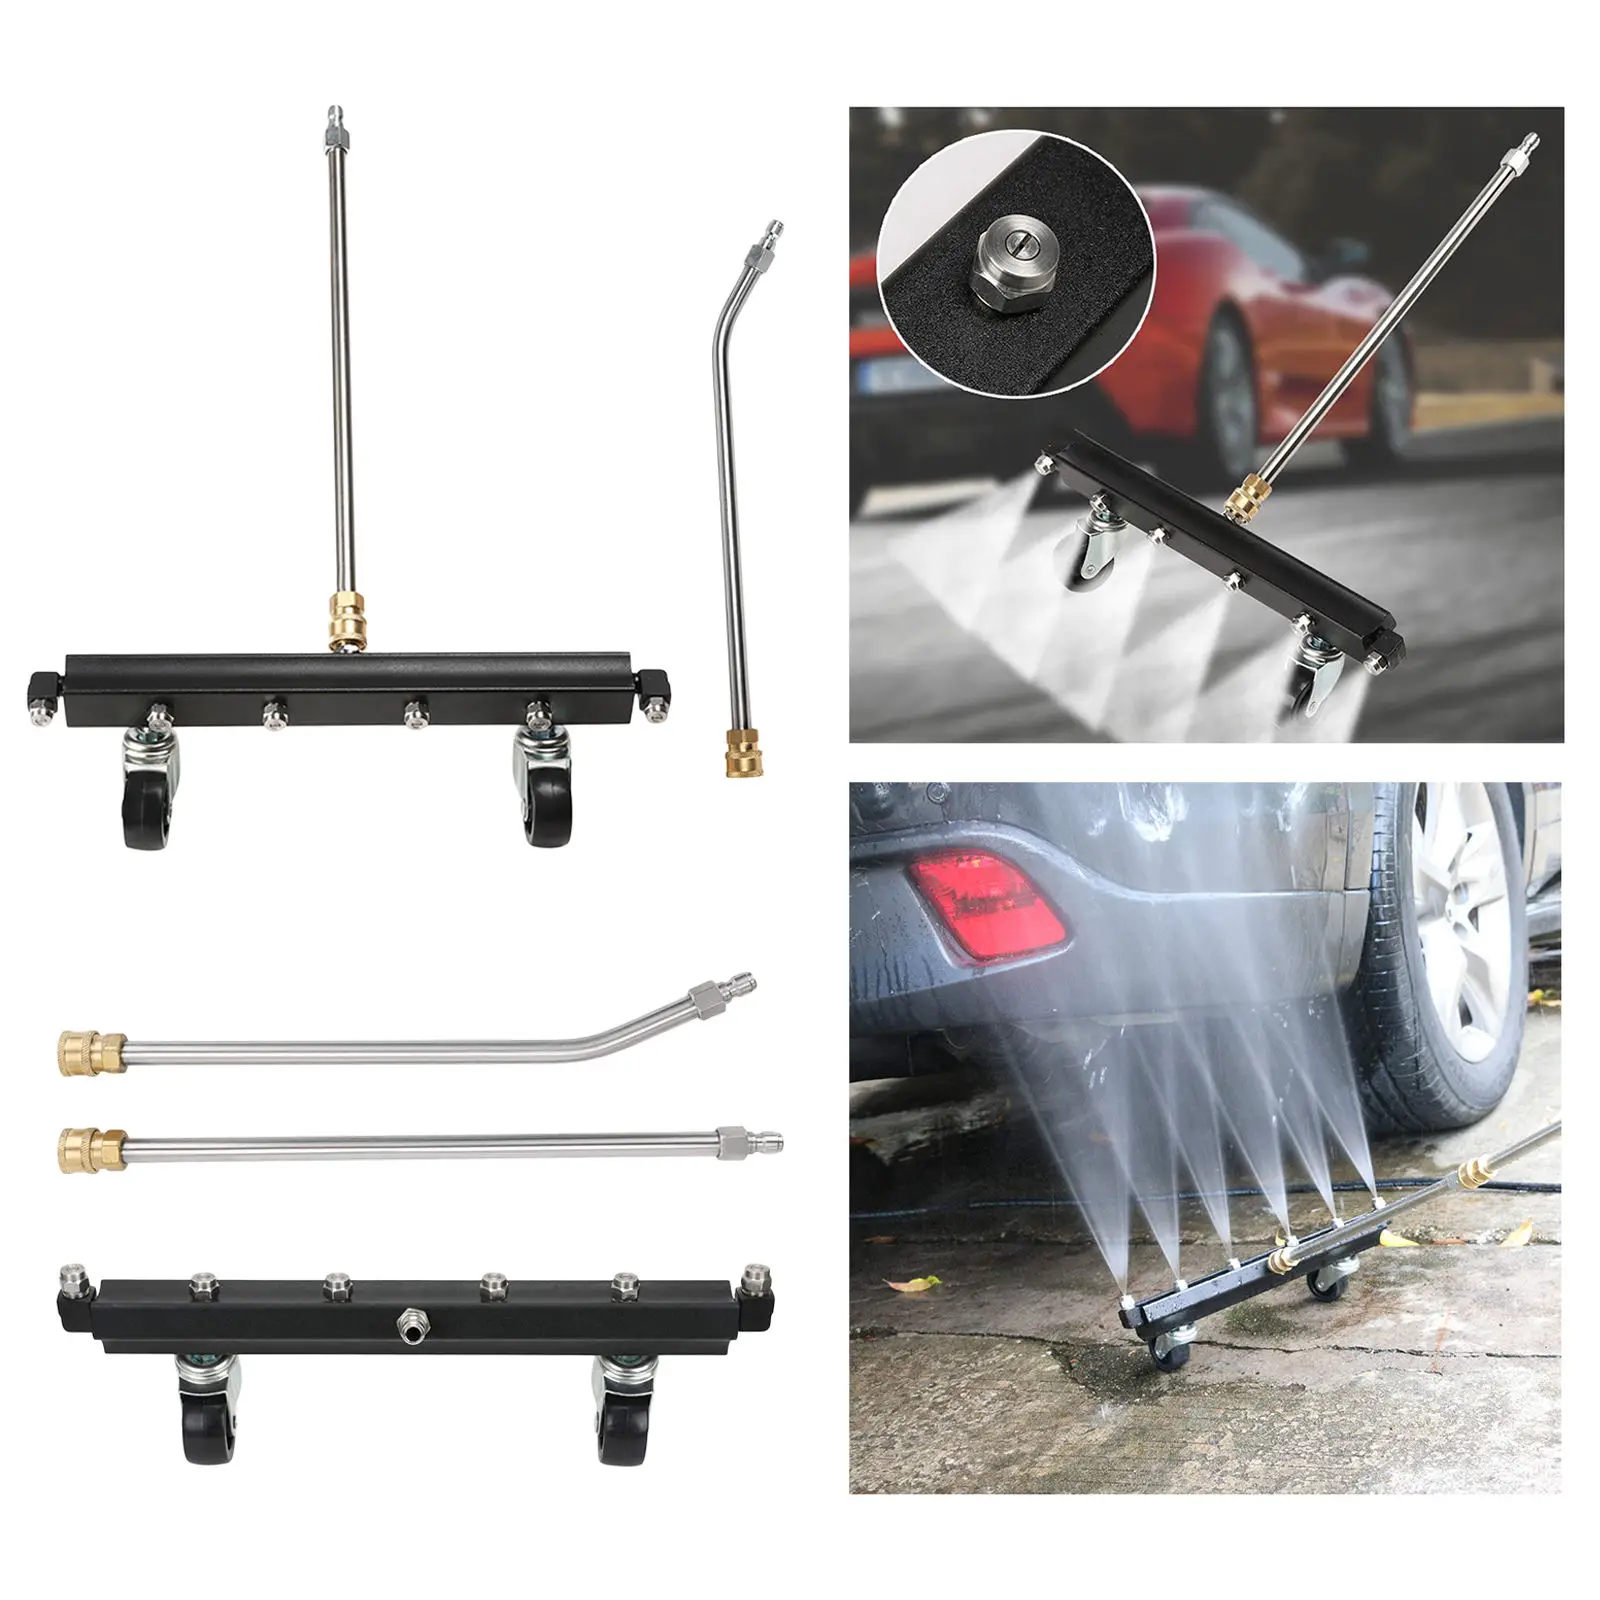 15inch Pressure Washer Attchment Undercarriage Cleaner with 6 Nozzles and 2 Extension Wands for Car Underbody Cleaning